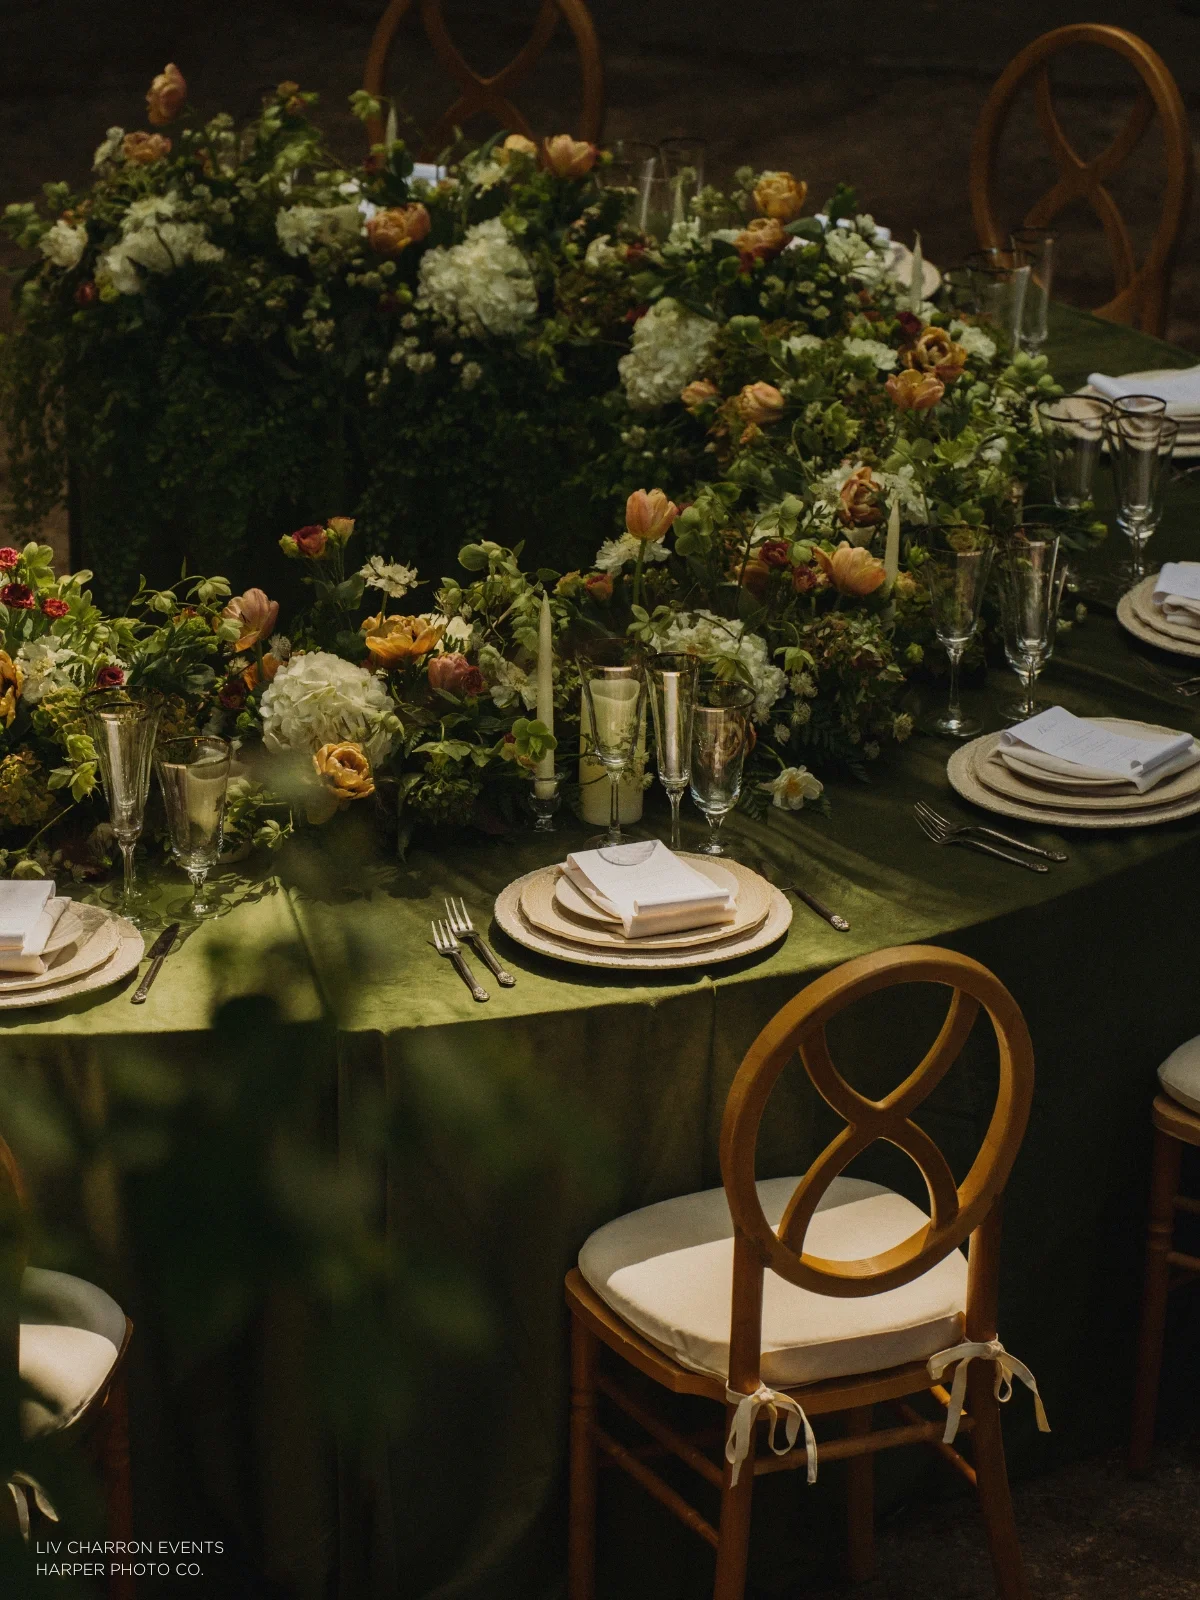 A circular dinner table is decorated with green foliage and flowers, set with plates, glasses, and white napkins. Wooden chairs with white cushions are arranged around the table.